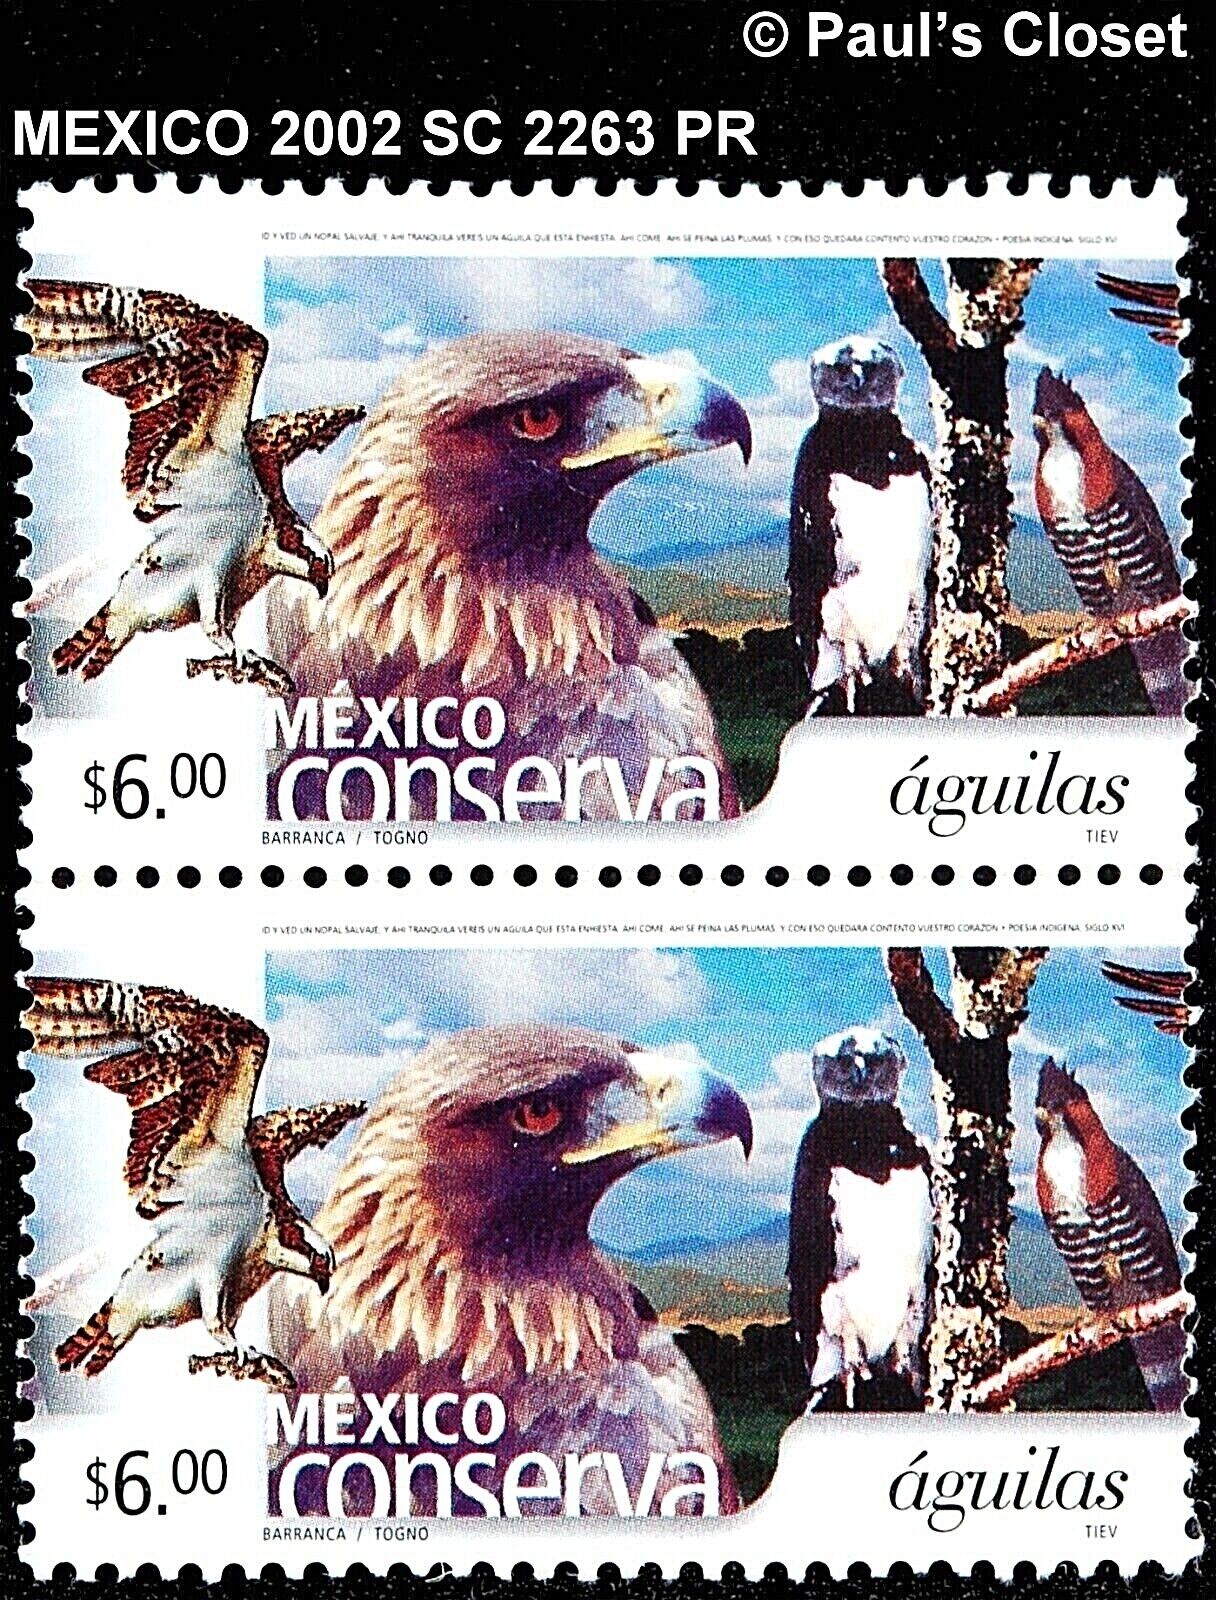 MEXICO 2002 SC 2263 CONSERVATION - EAGLES $6.00 PAIR MNG VERY FINE  Без бренда